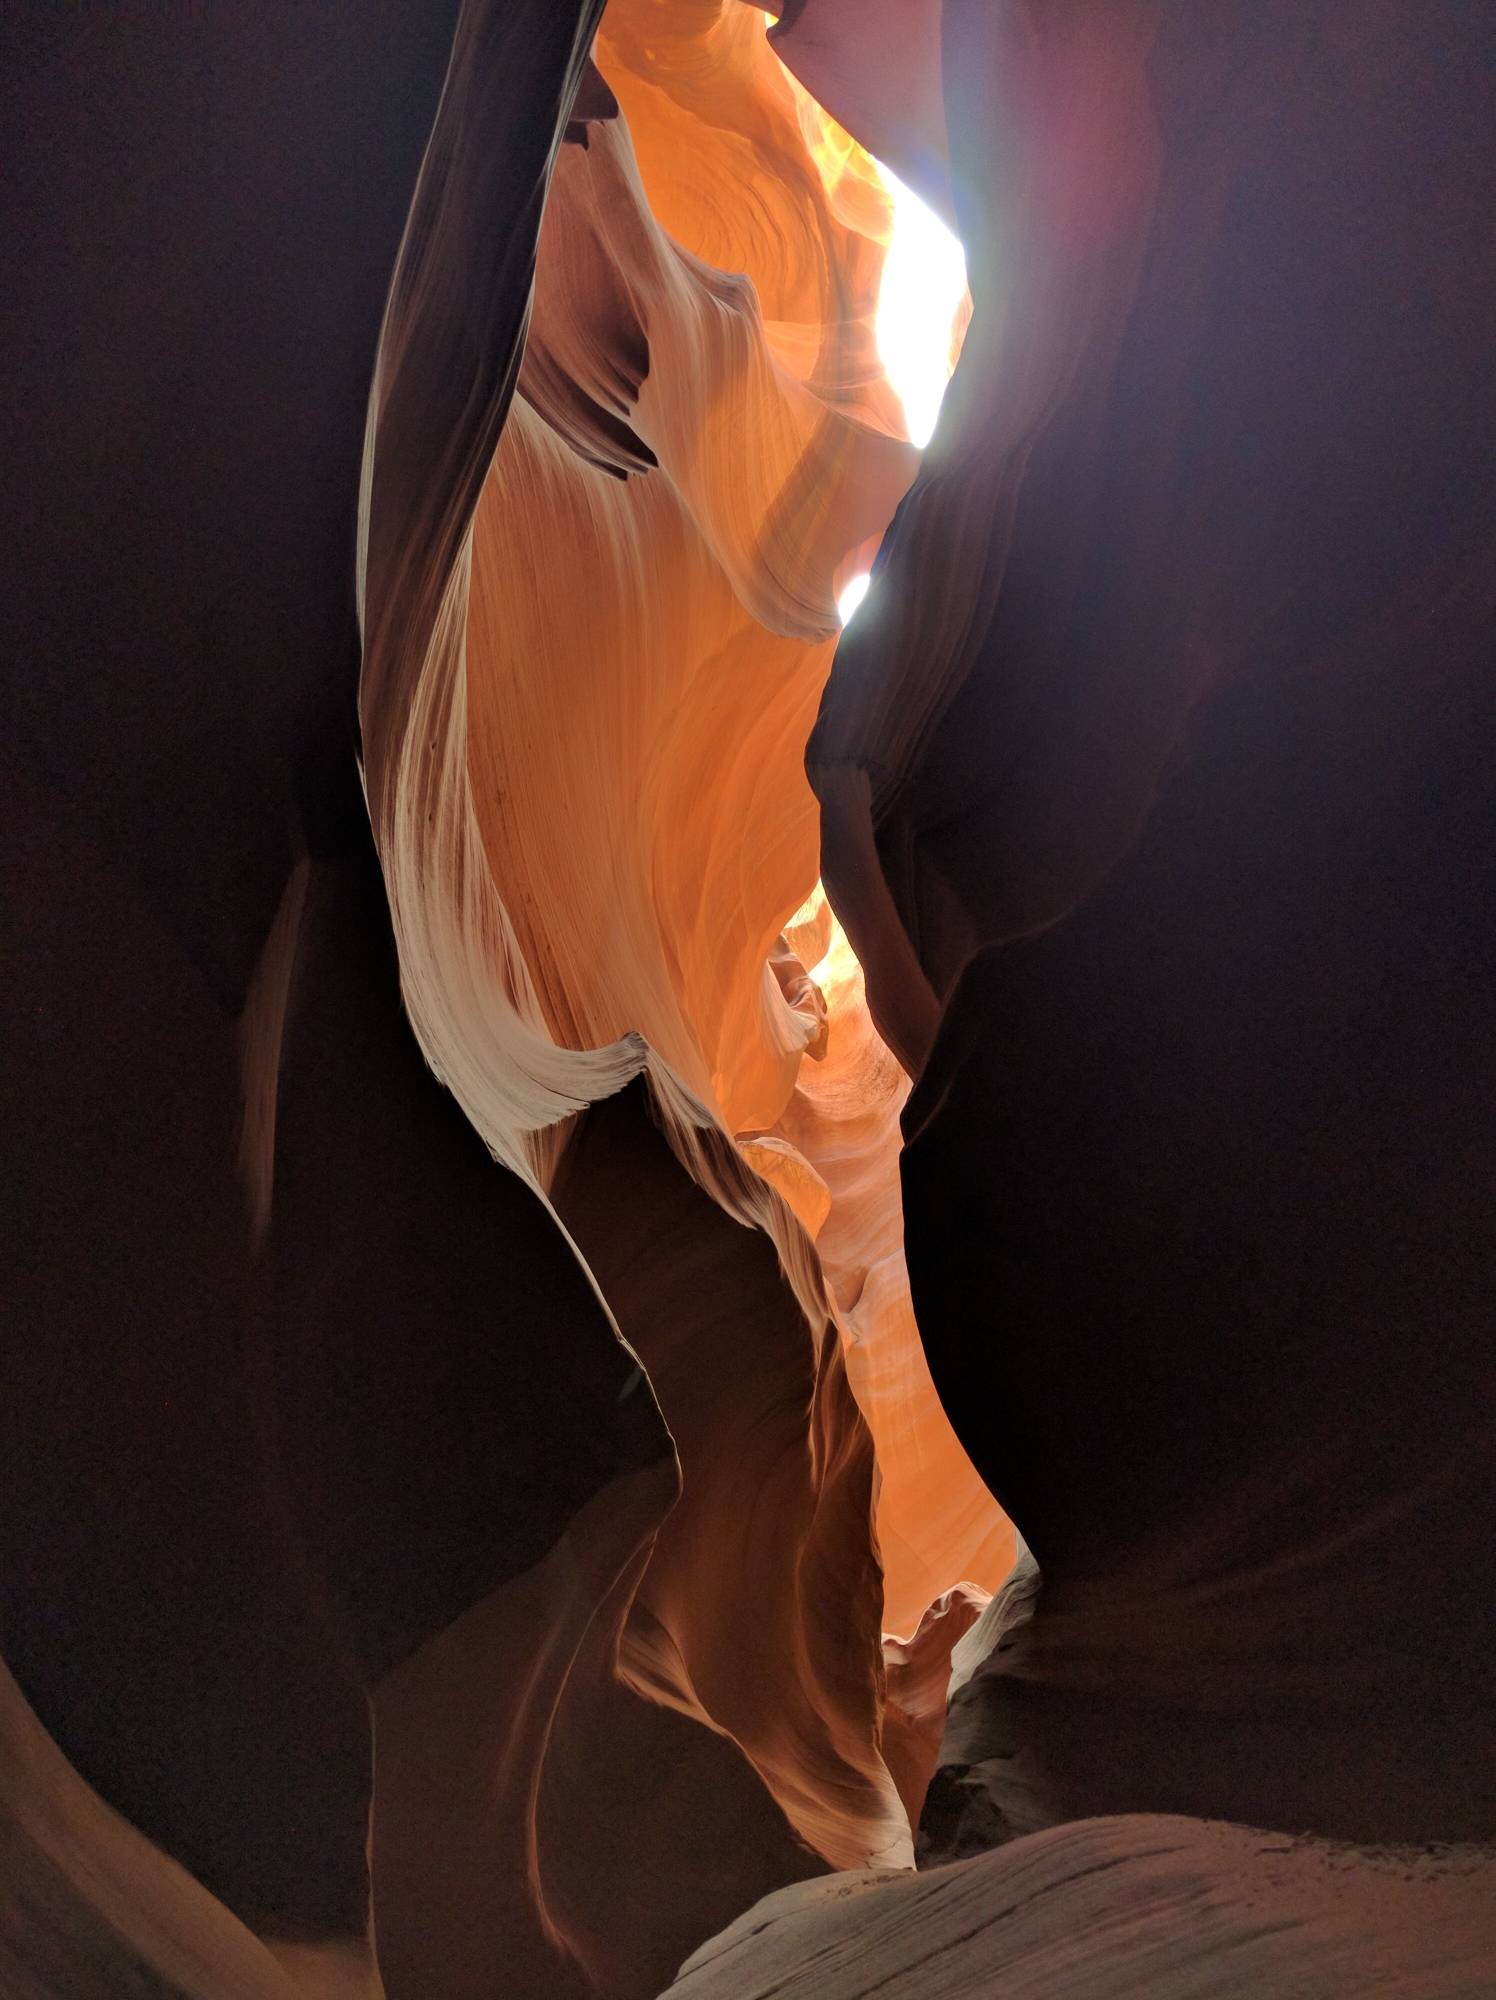 Image: The crevices of the Upper Antelope Canyon